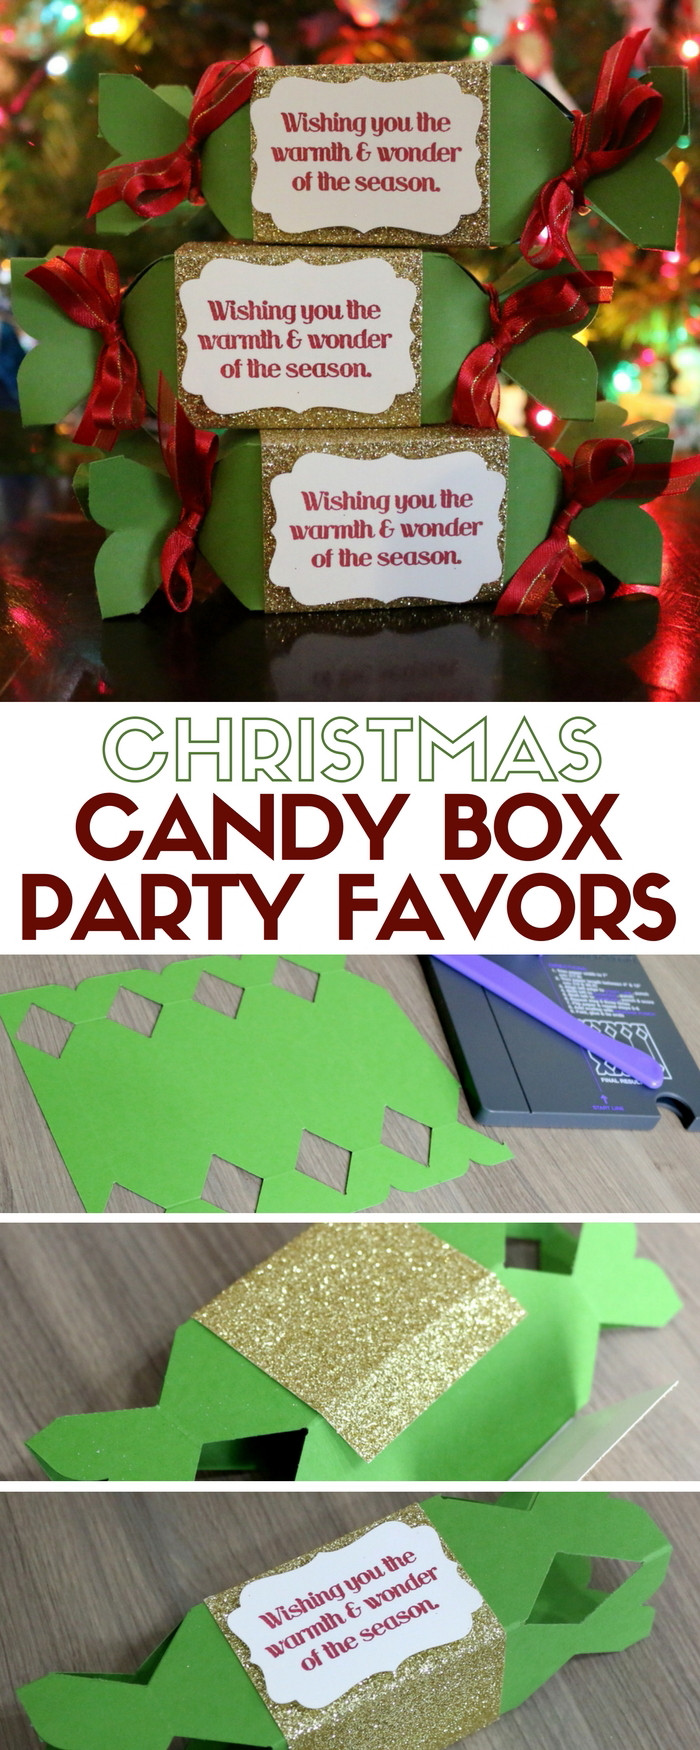 Christmas Candy Favors
 How to Make Christmas Candy Box Party Favors The Crafty